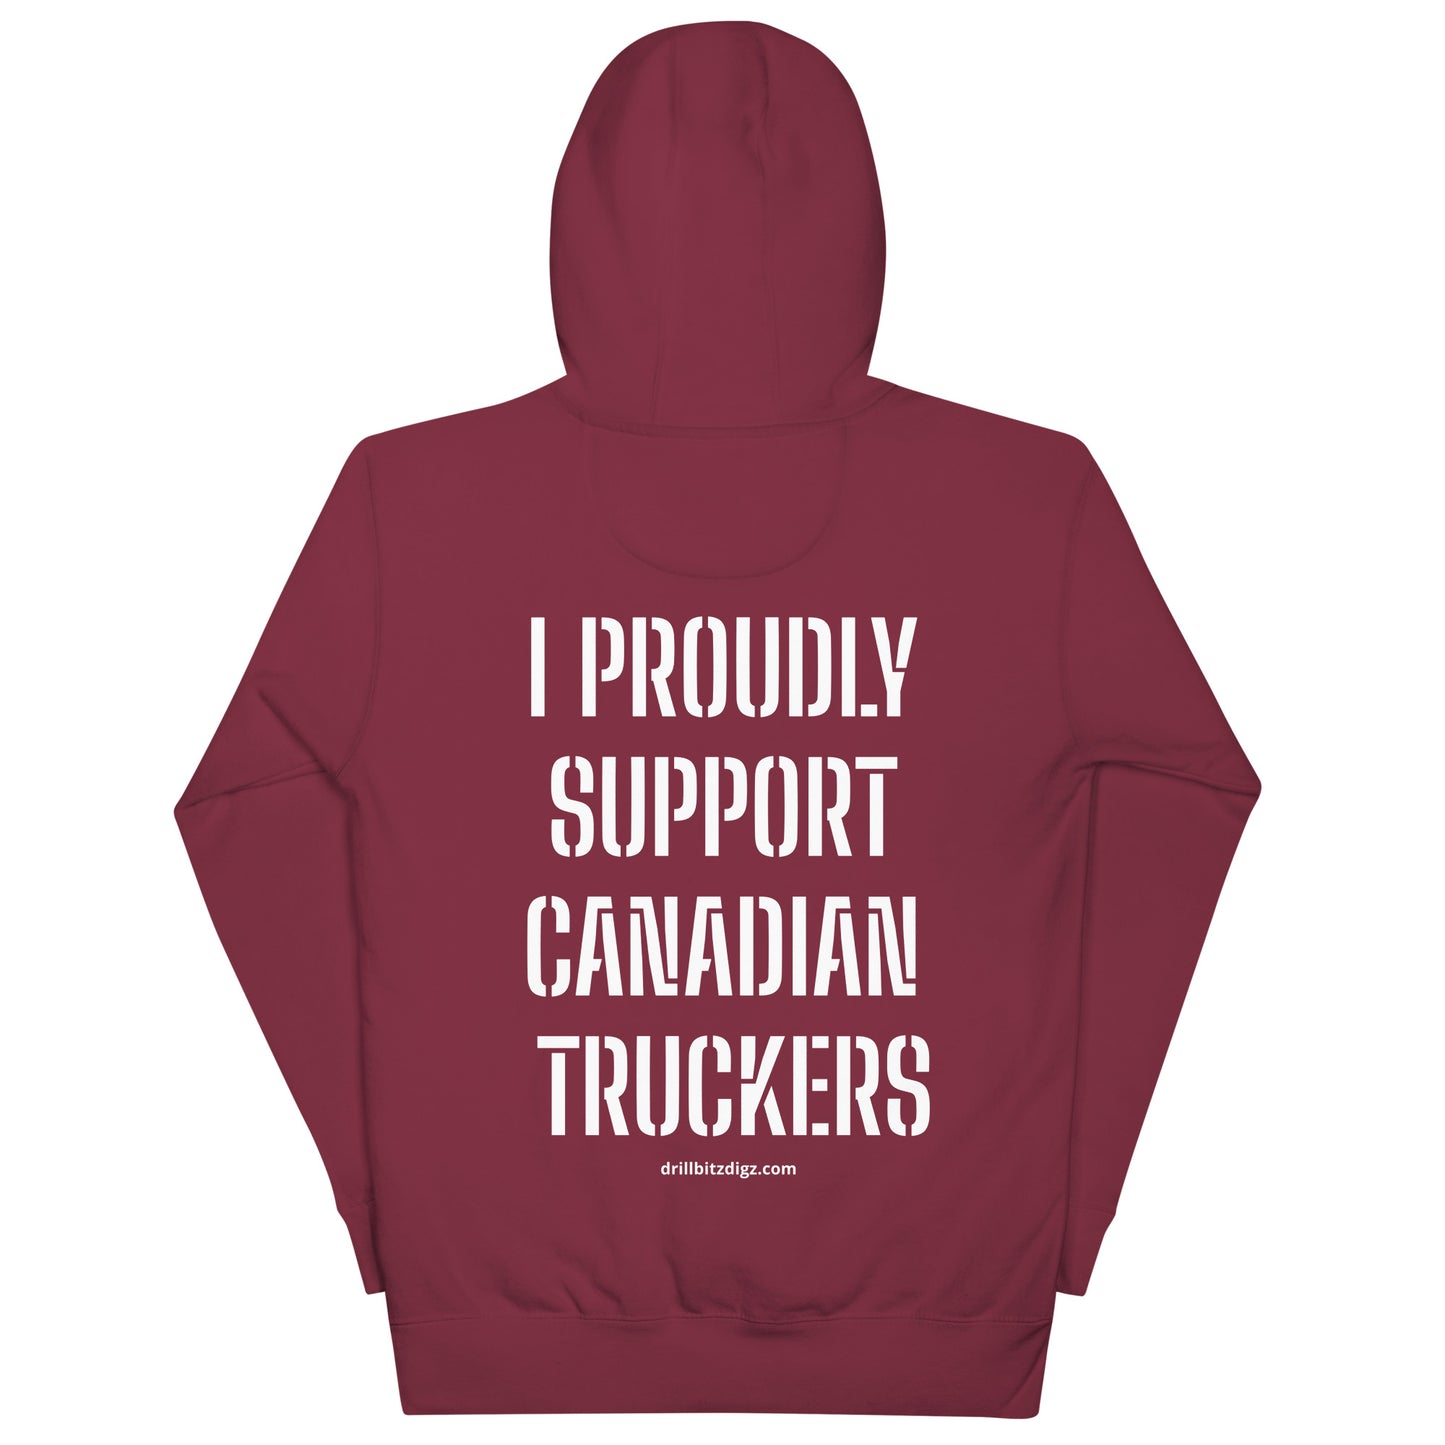 I PROUDLY SUPPORT CANADIAN TRUCKERS Hoodie